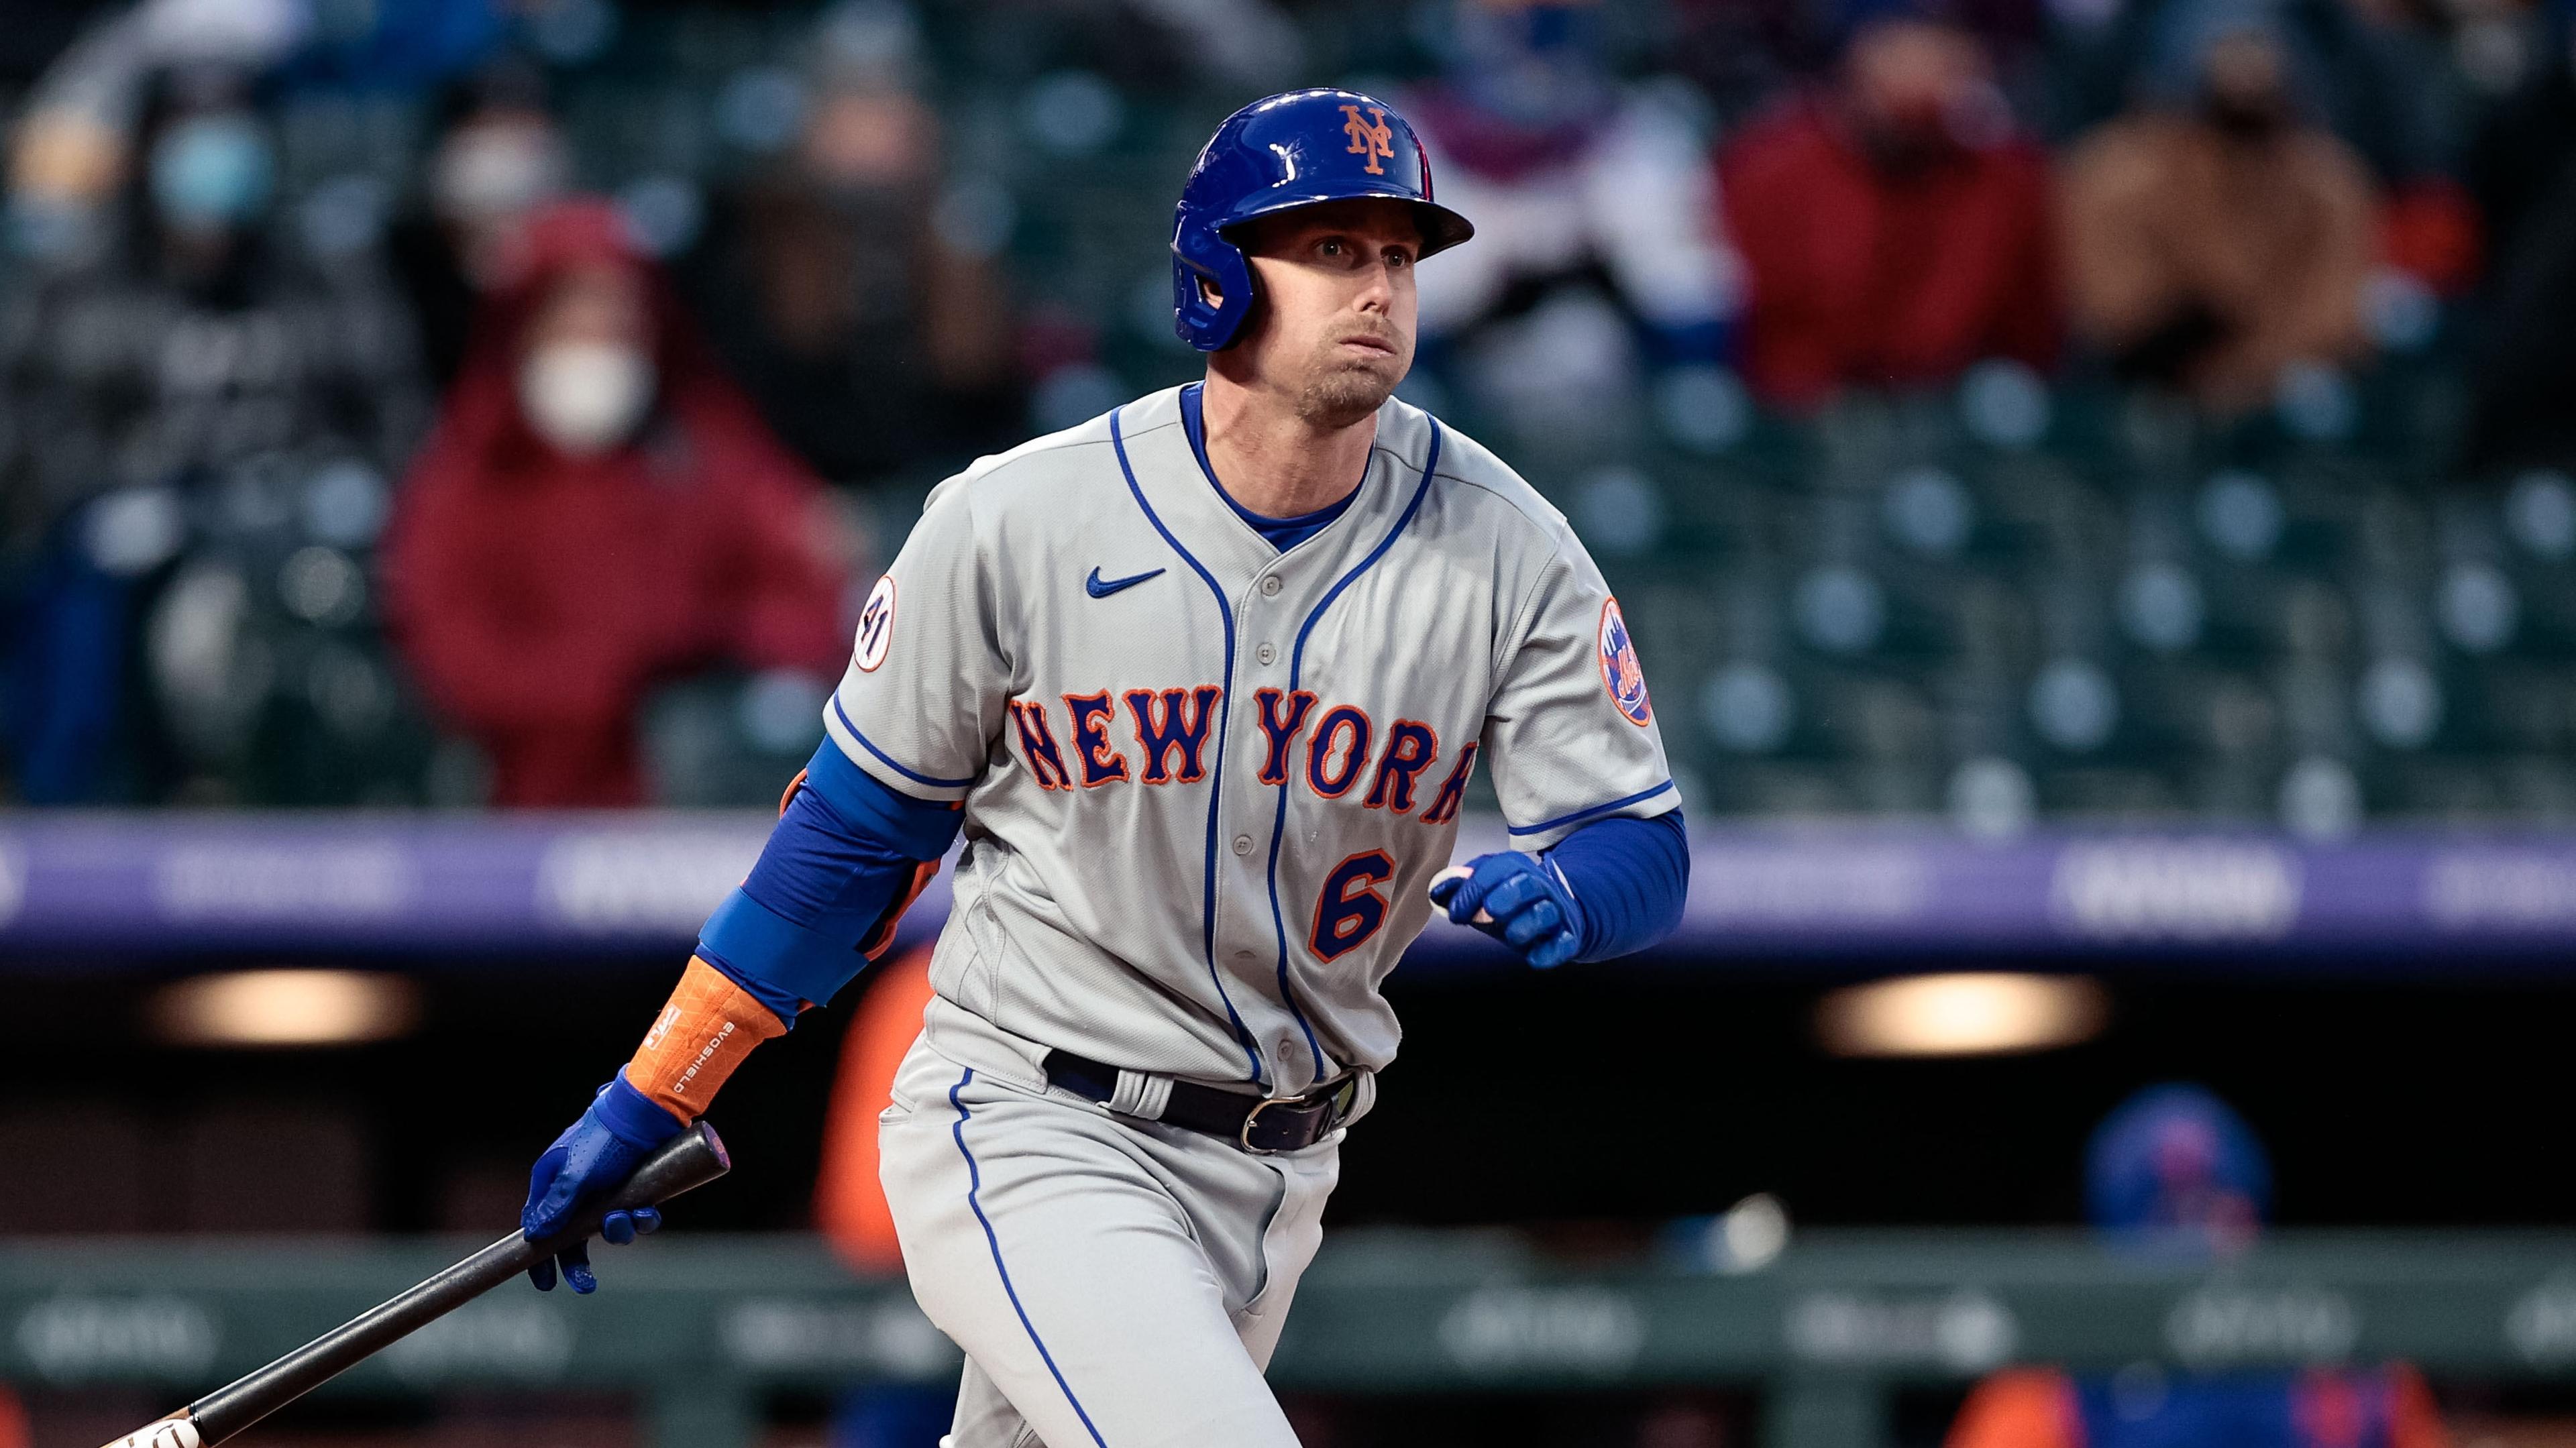 Apr 17, 2021; Denver, Colorado, USA; New York Mets second baseman Jeff McNeil (6) watches his ball on a two RBI double in the fourth inning against the Colorado Rockies at Coors Field. Mandatory Credit: Isaiah J. Downing-USA TODAY Sports / © Isaiah J. Downing-USA TODAY Sports